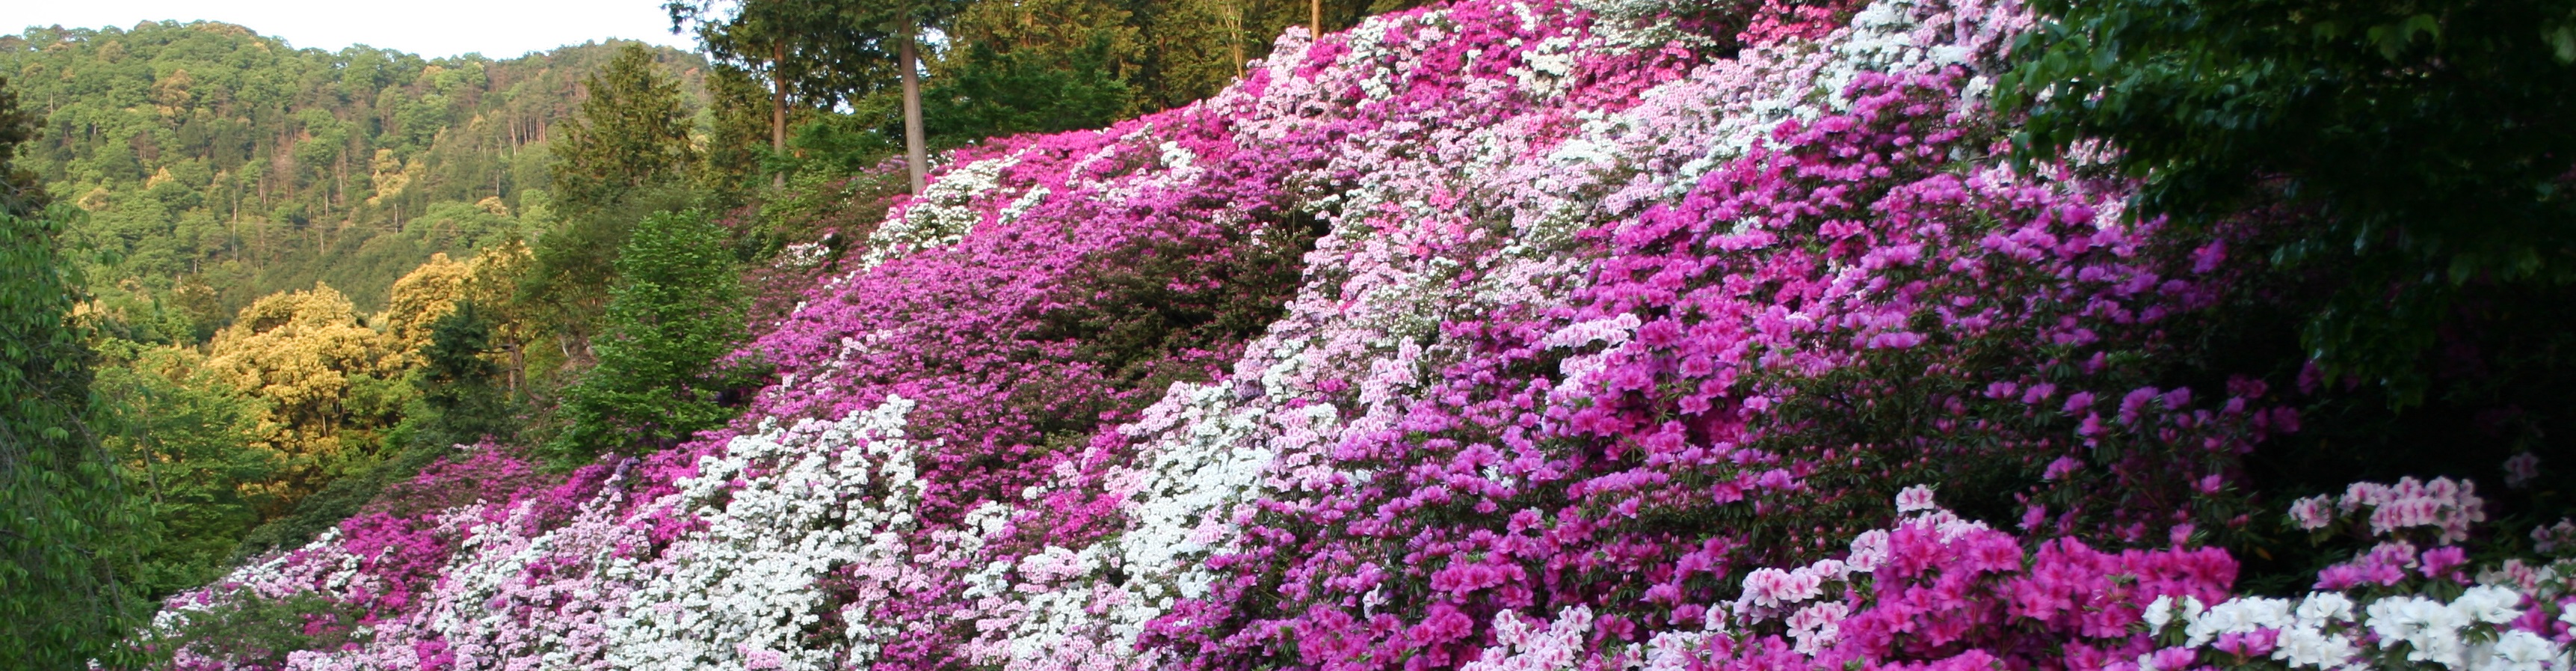 Nine Must-see Spots of the Spring Flowers in Kyoto / Official site ...